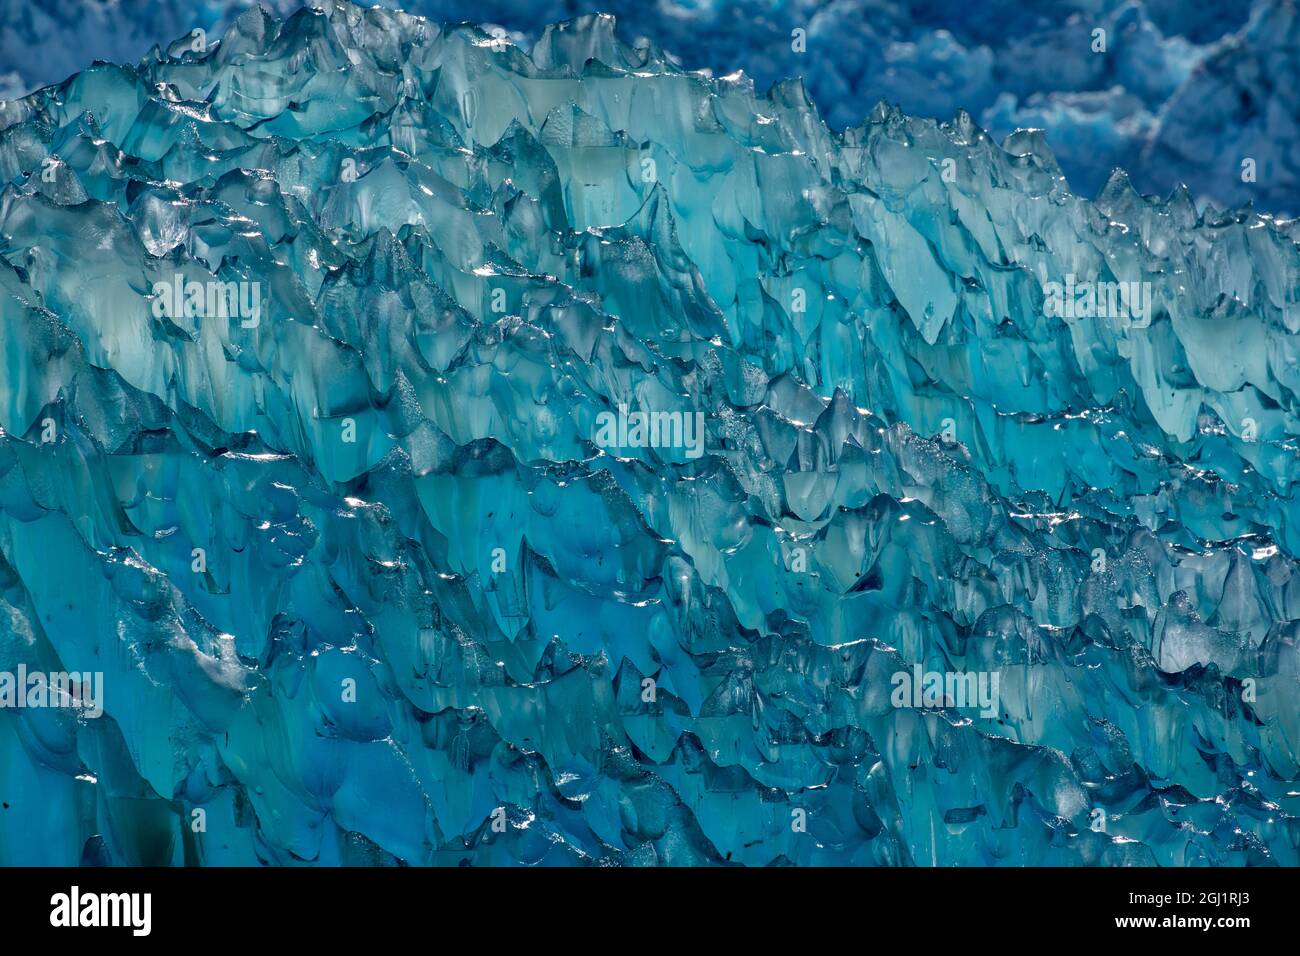 USA, Alaska, Tracy Arm-Fords Terror Wilderness, Close-up of deep blue iceberg floating near face of South Sawyer Glacier in Tracy Arm Stock Photo